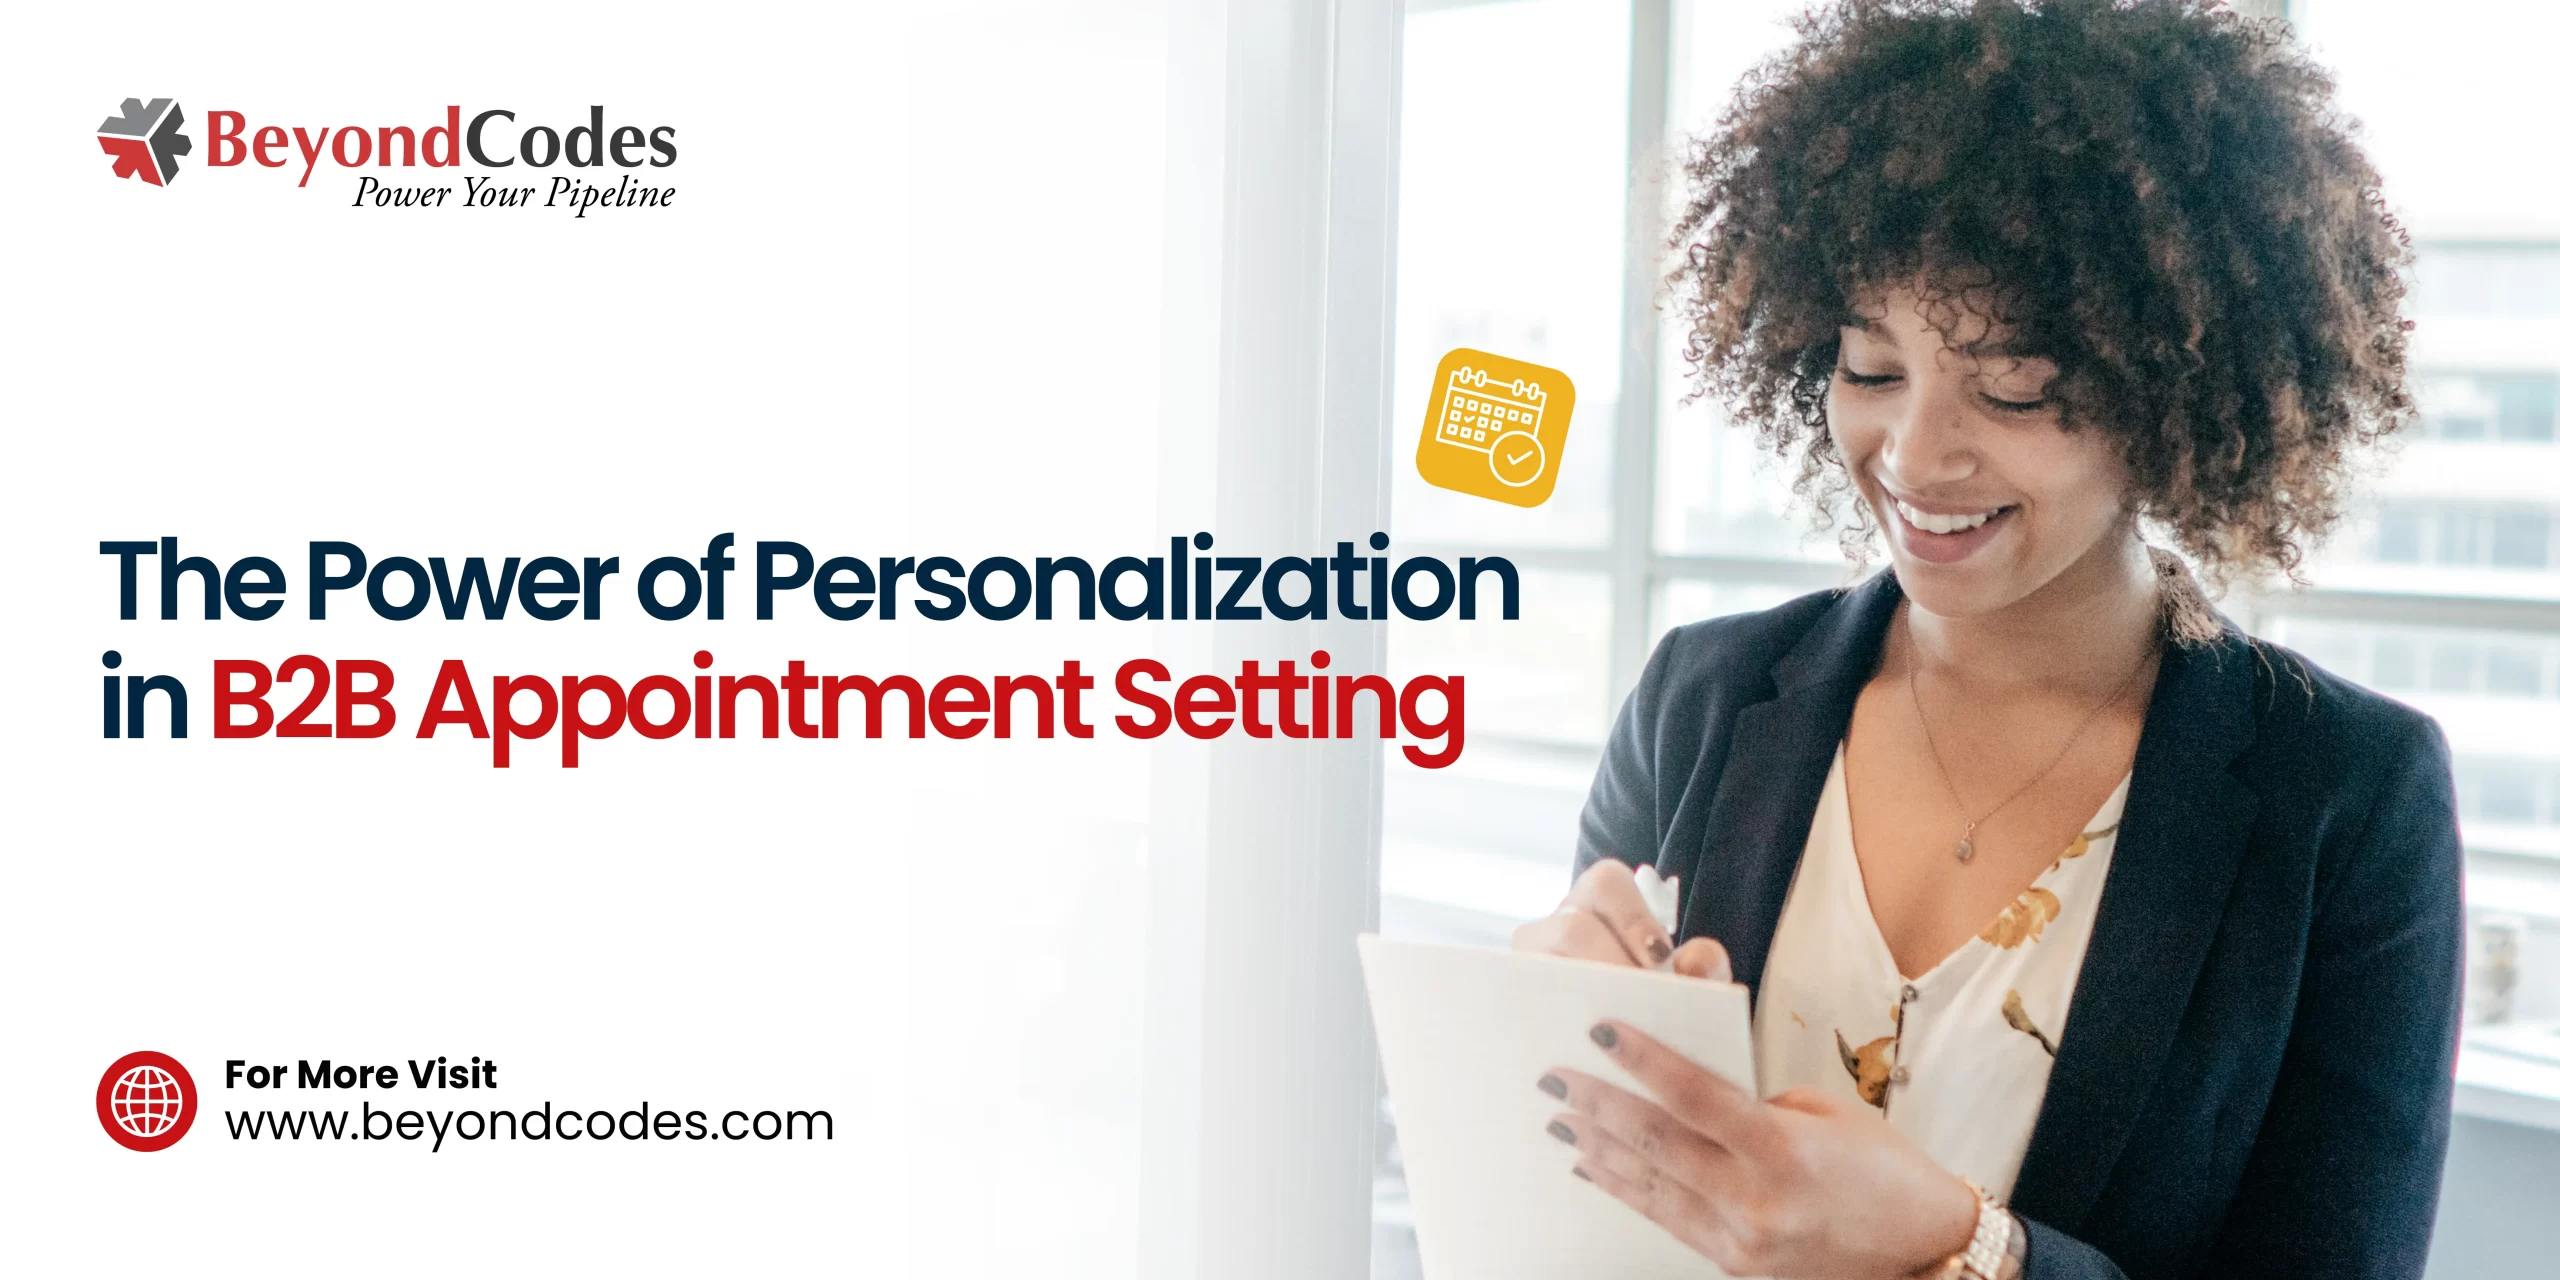 The Power of Personalization in B2B Appointment Setting - beyondcodes